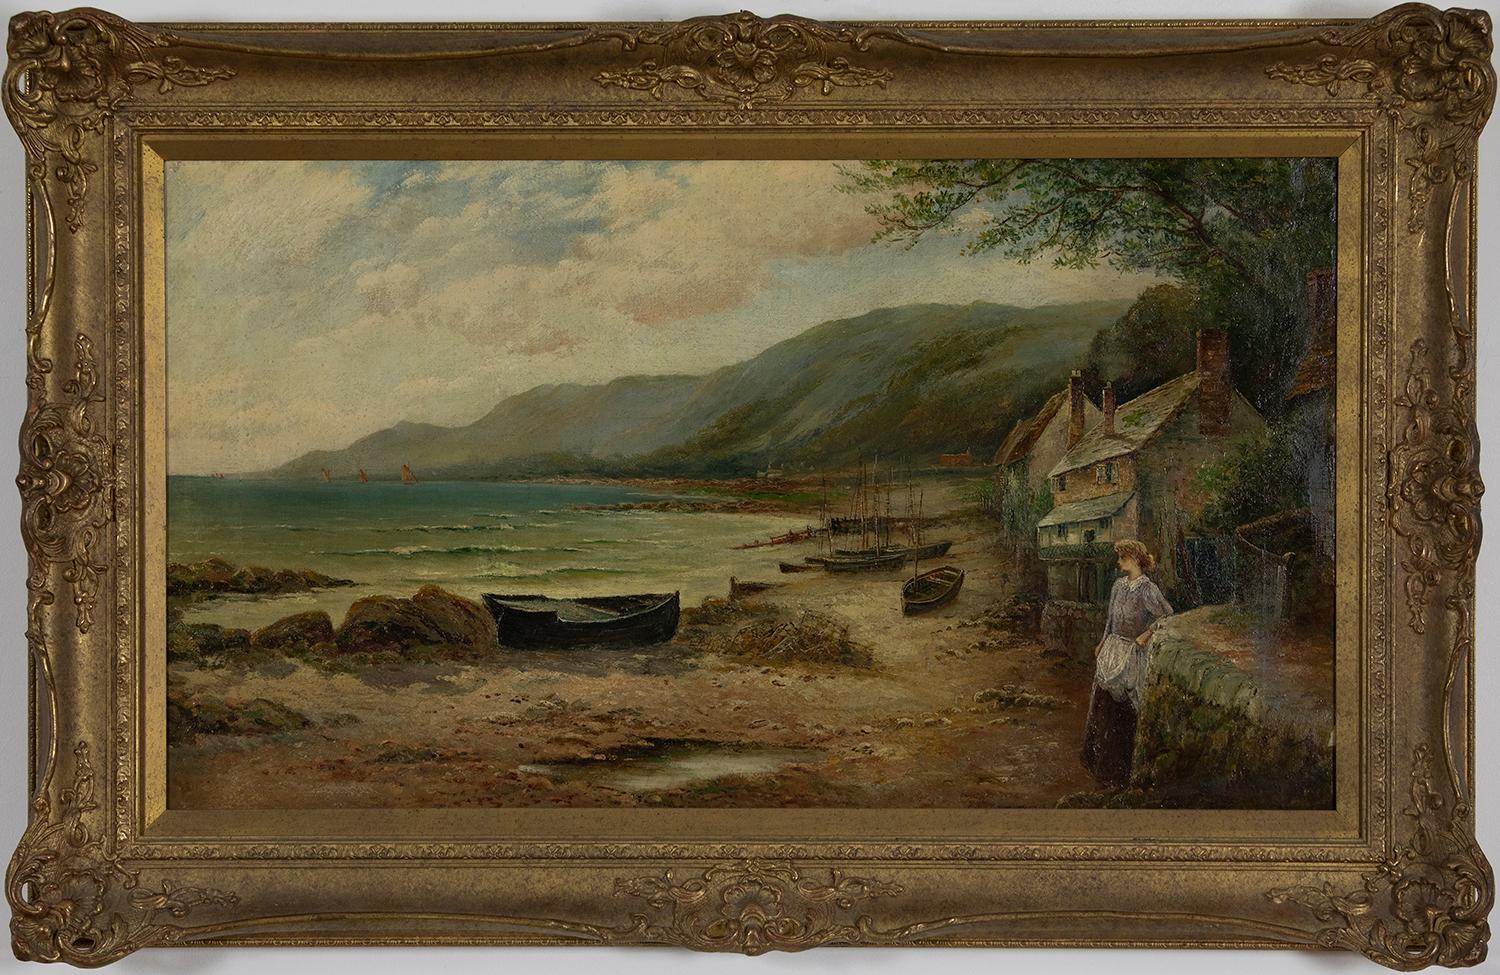 Waiting for the Boats by ERNEST WALBOURN, RBA - 19th century landscape painting - Painting by Ernest Walbourn